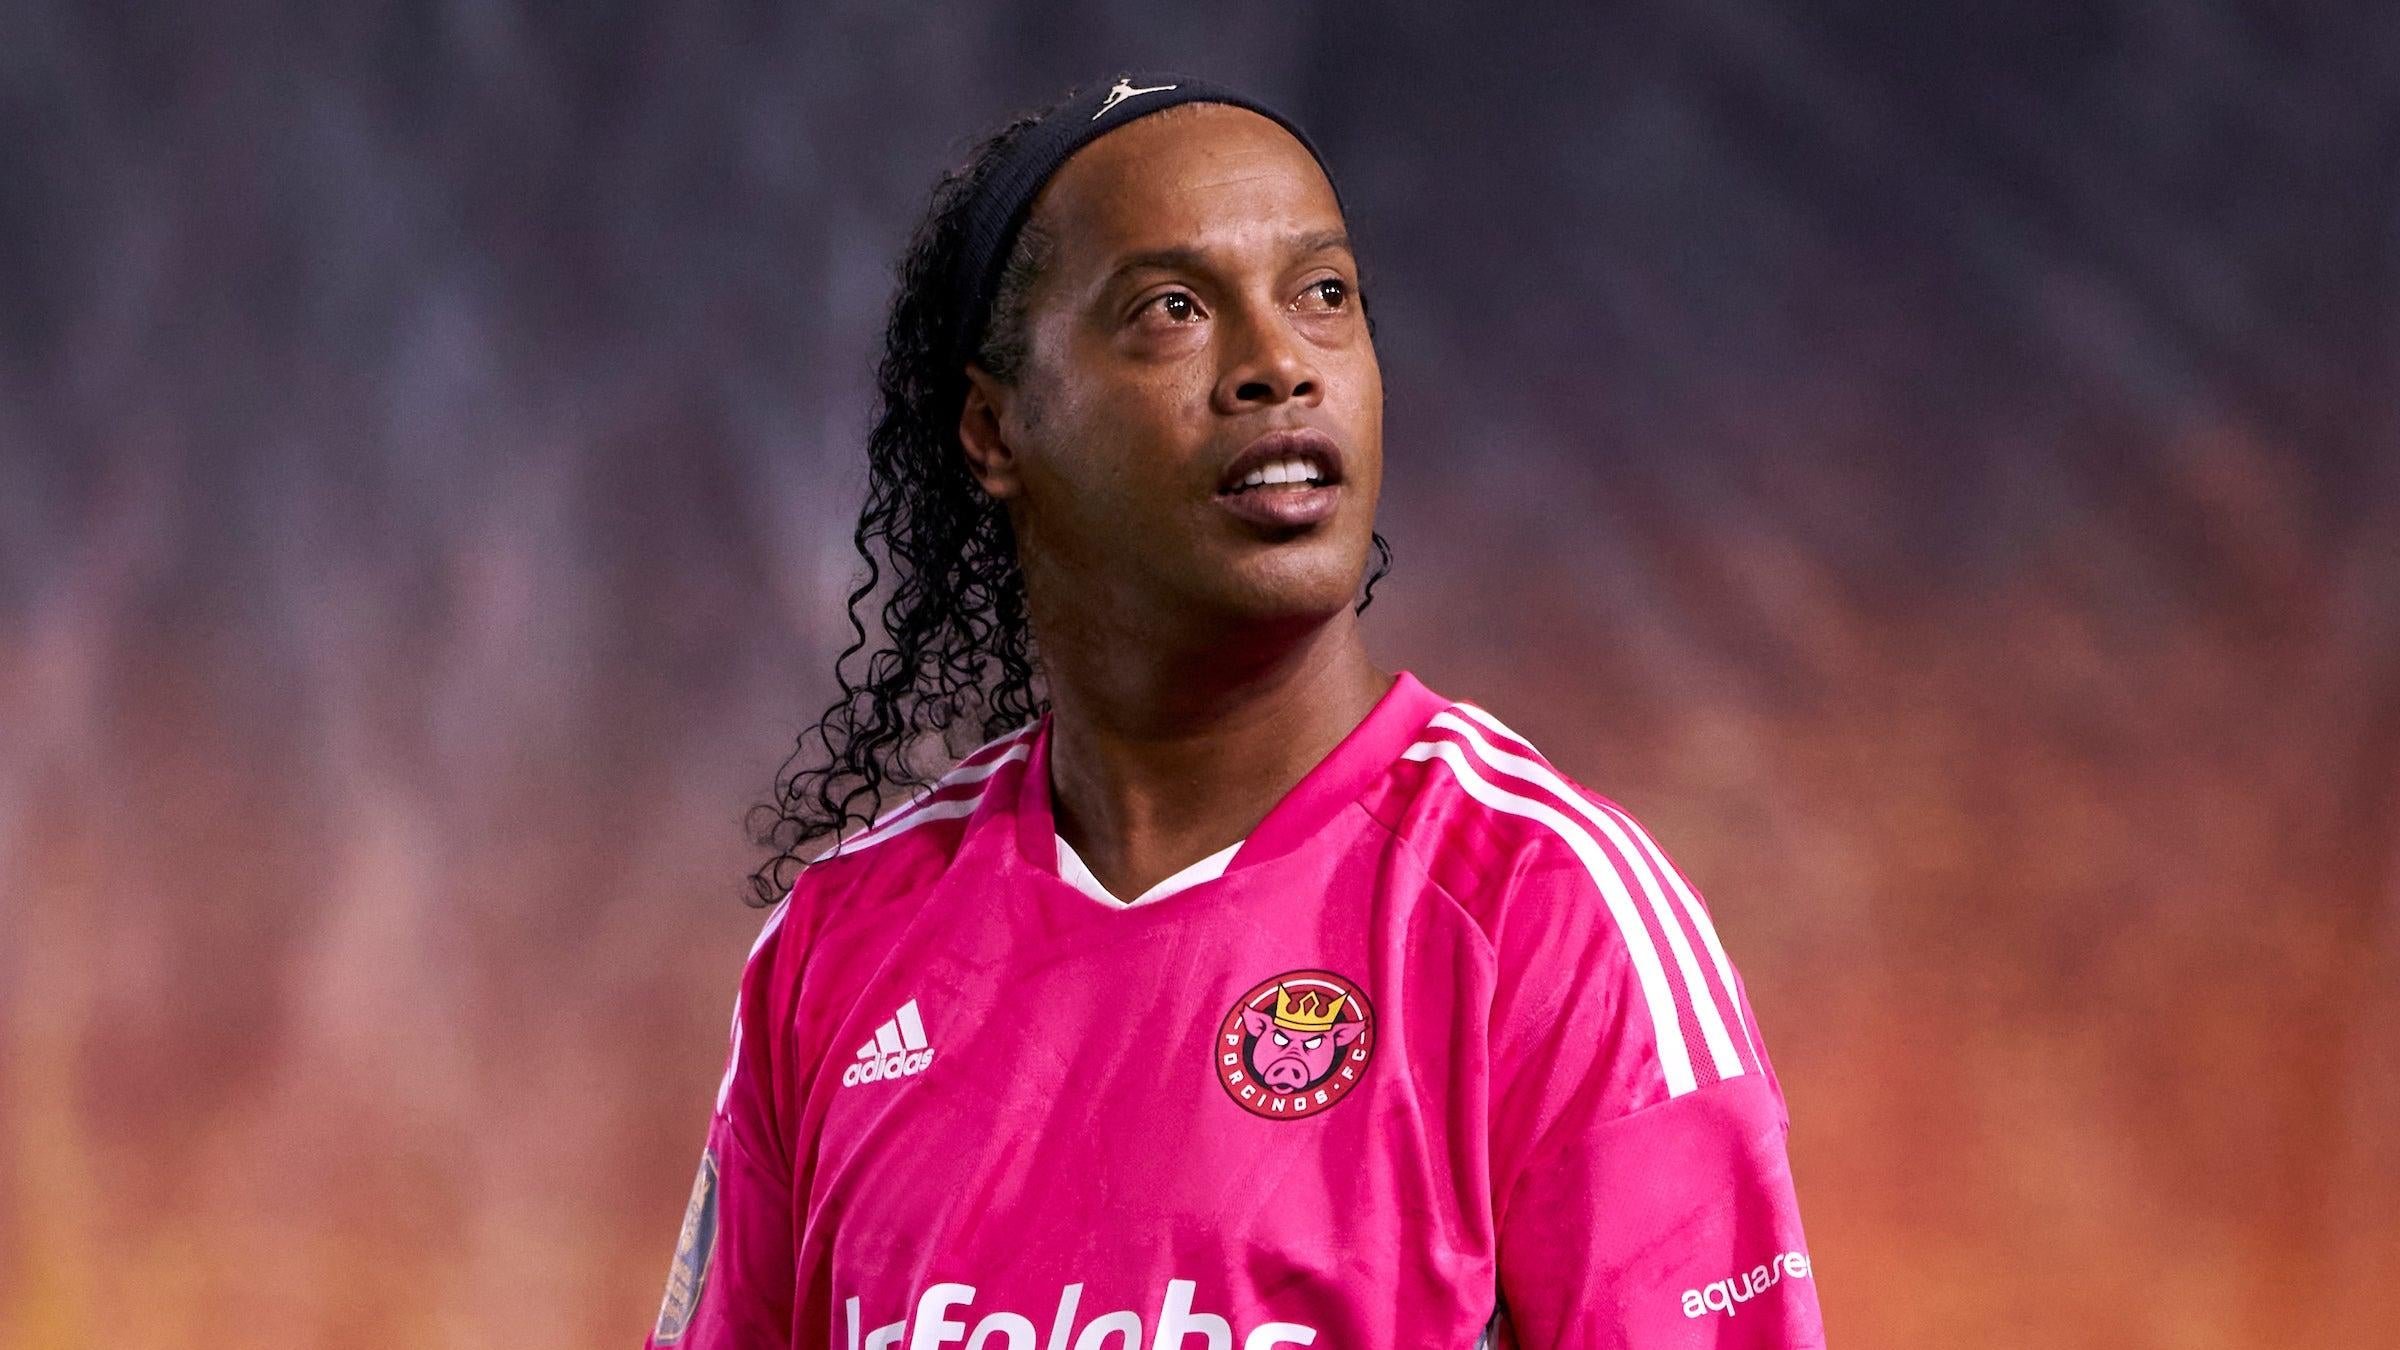 Retired Brazilian soccer legend Ronaldinho donned Ibai's pink Porcinos FC jersey to play in the Kings League. (Photo: Kings League InfoJobs)